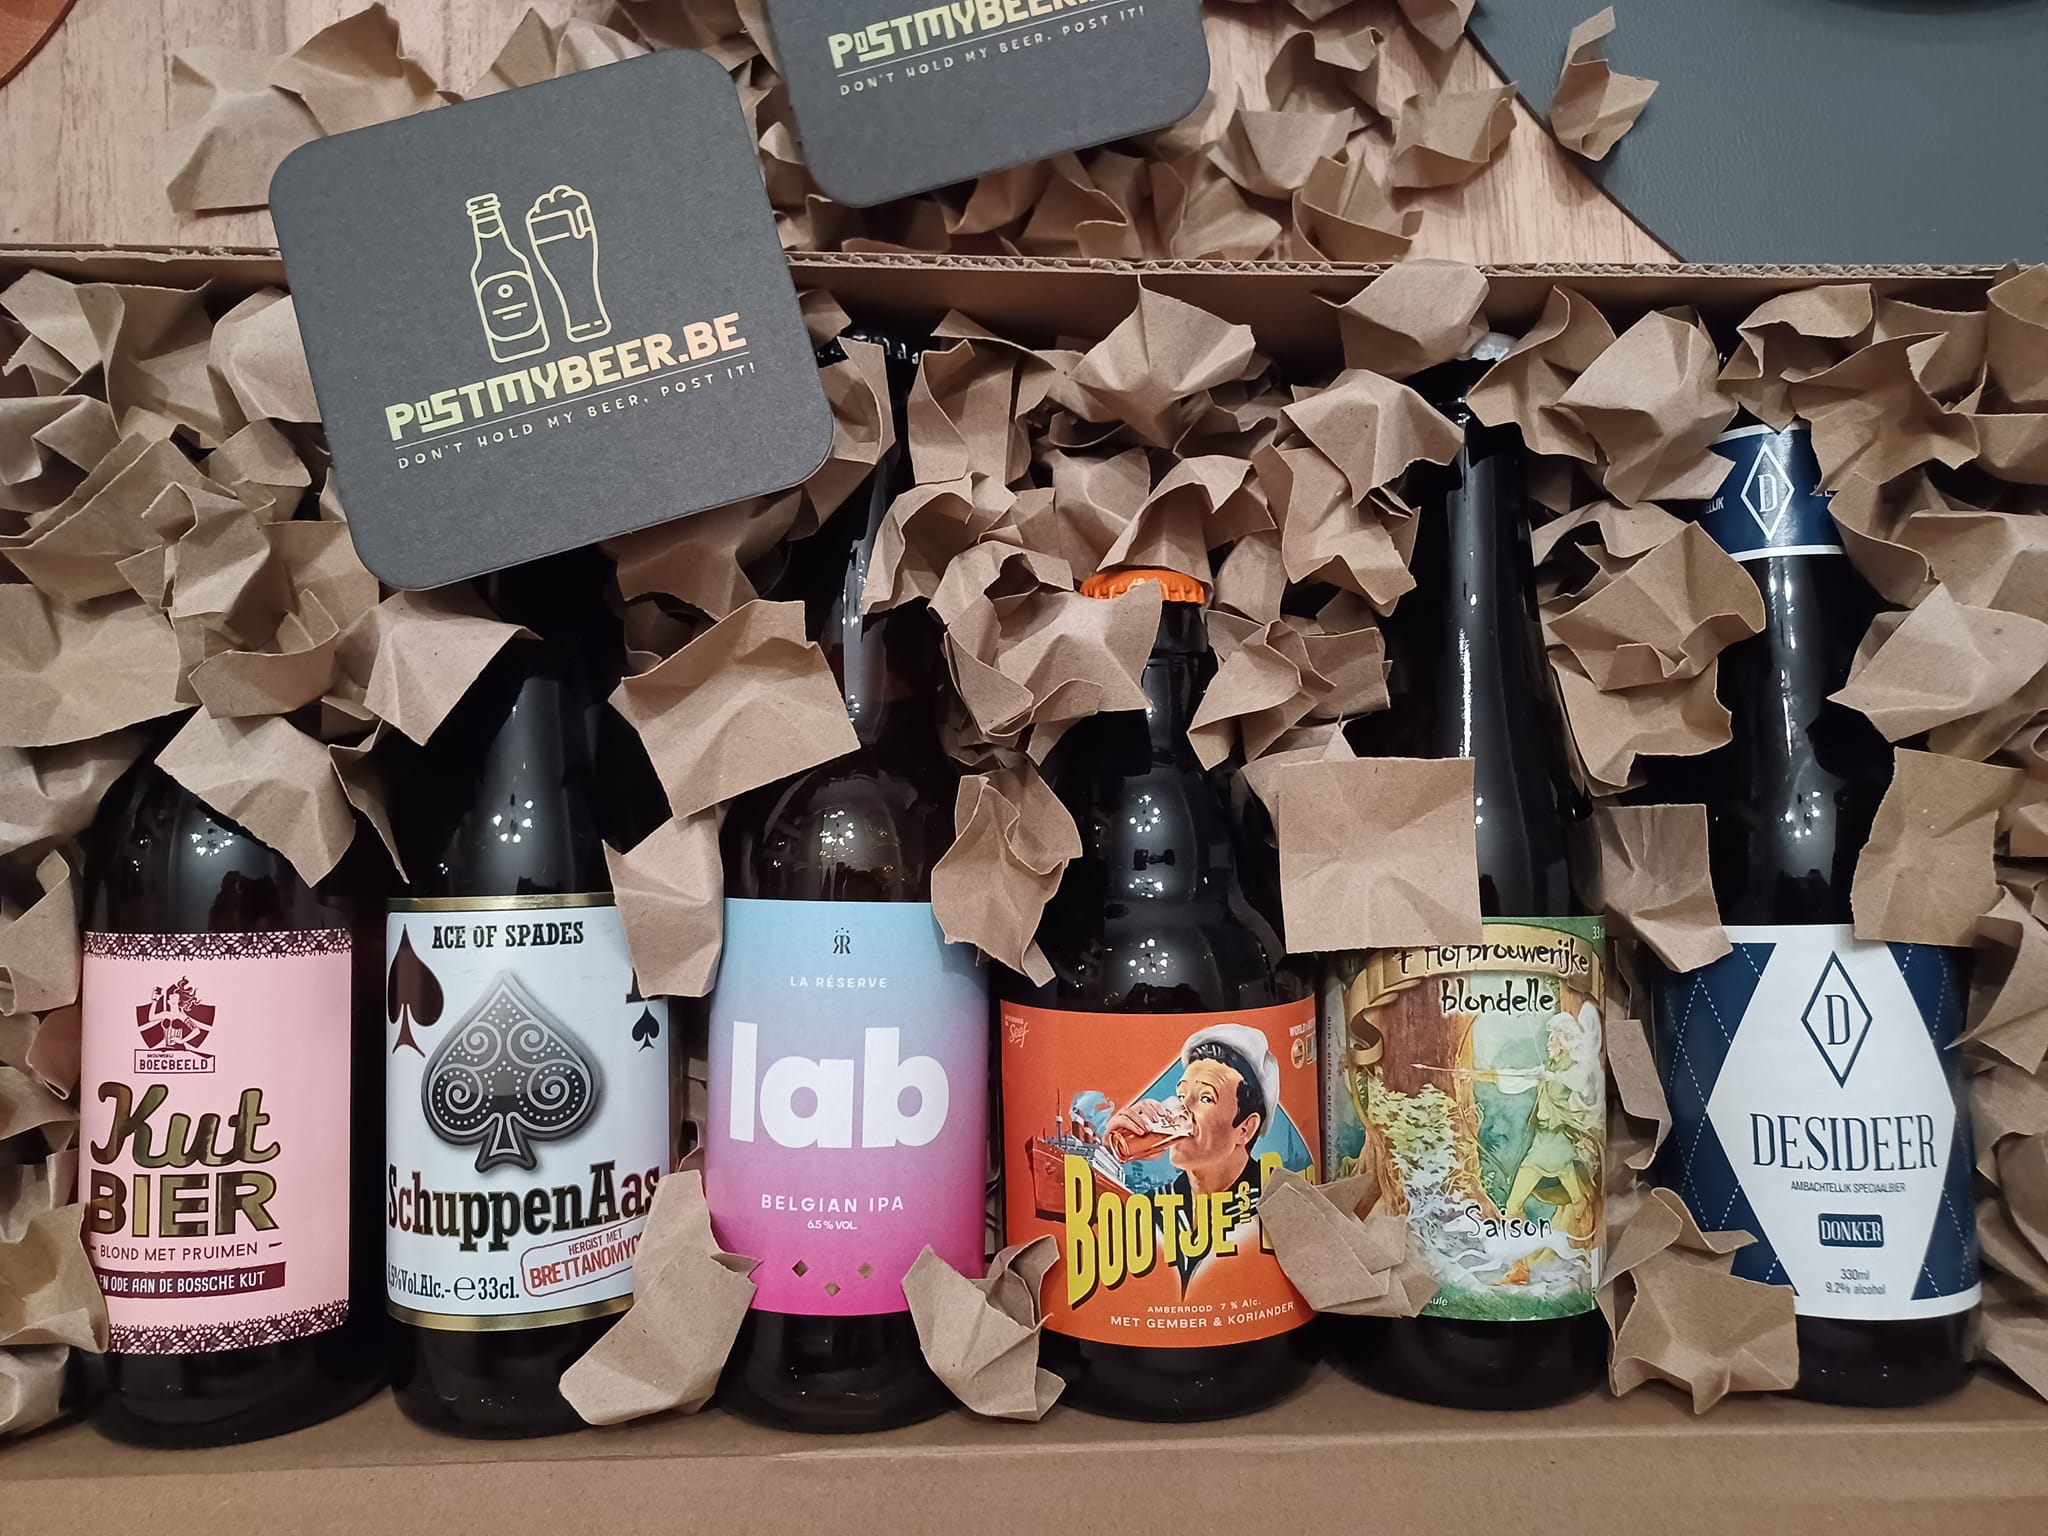 Example of an opened discoverybox, containing 6 beers